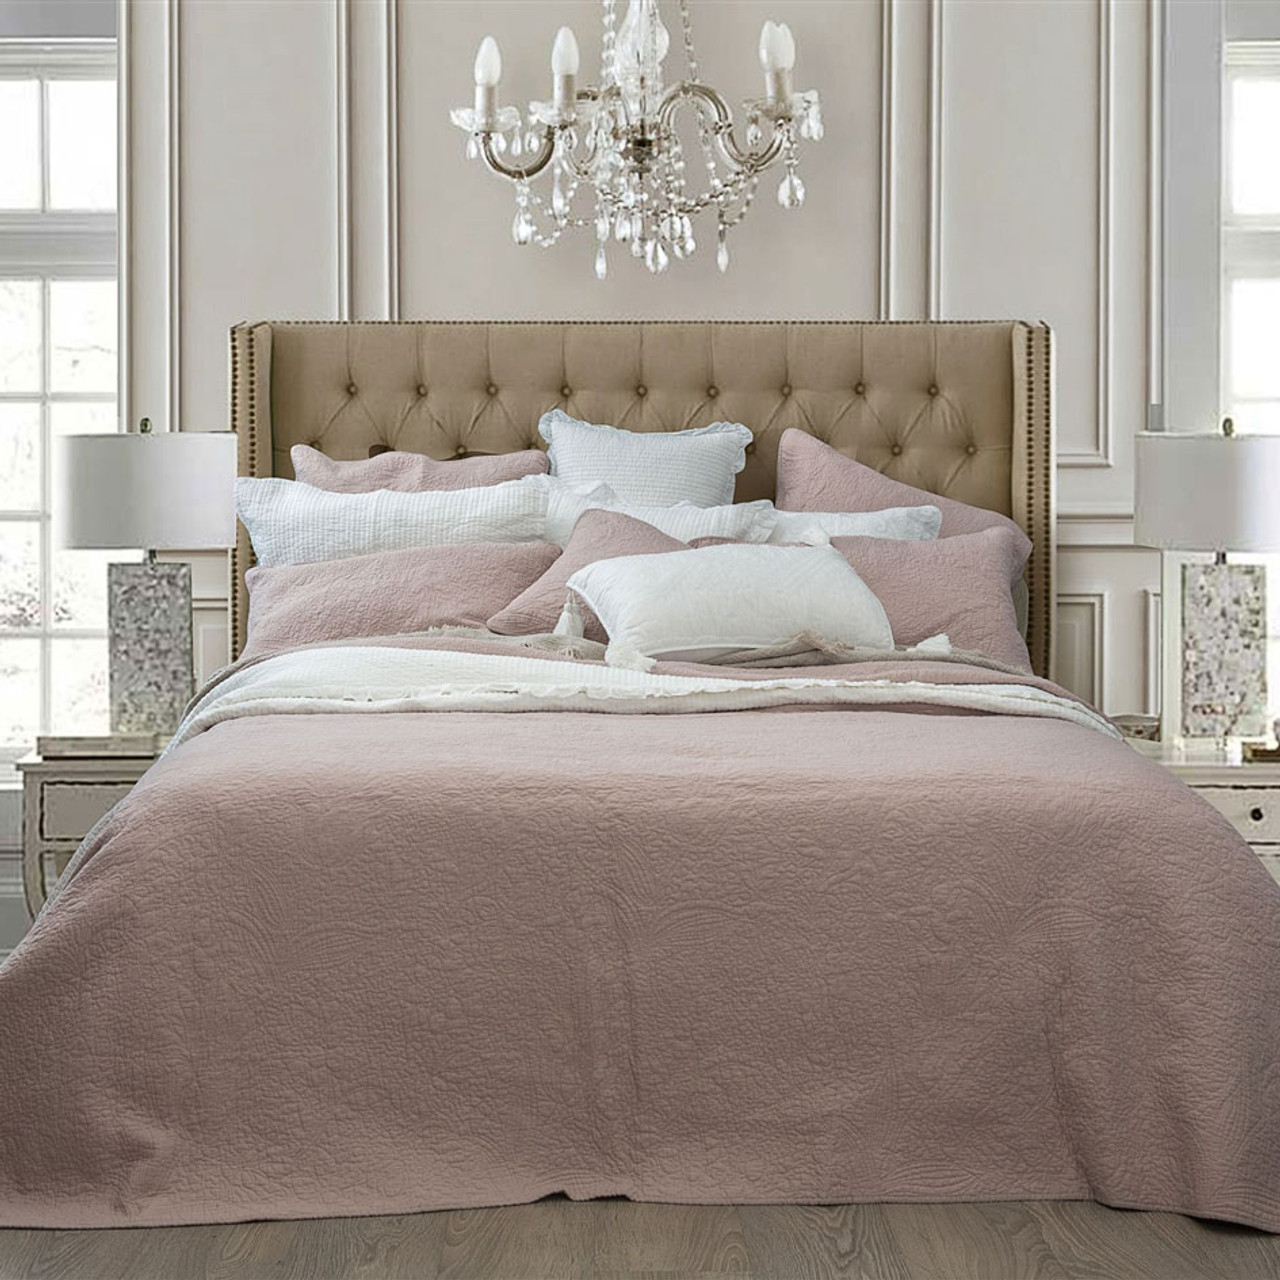 Monet Blush Pink Coverlet Set Queen Bed By Macey Moore